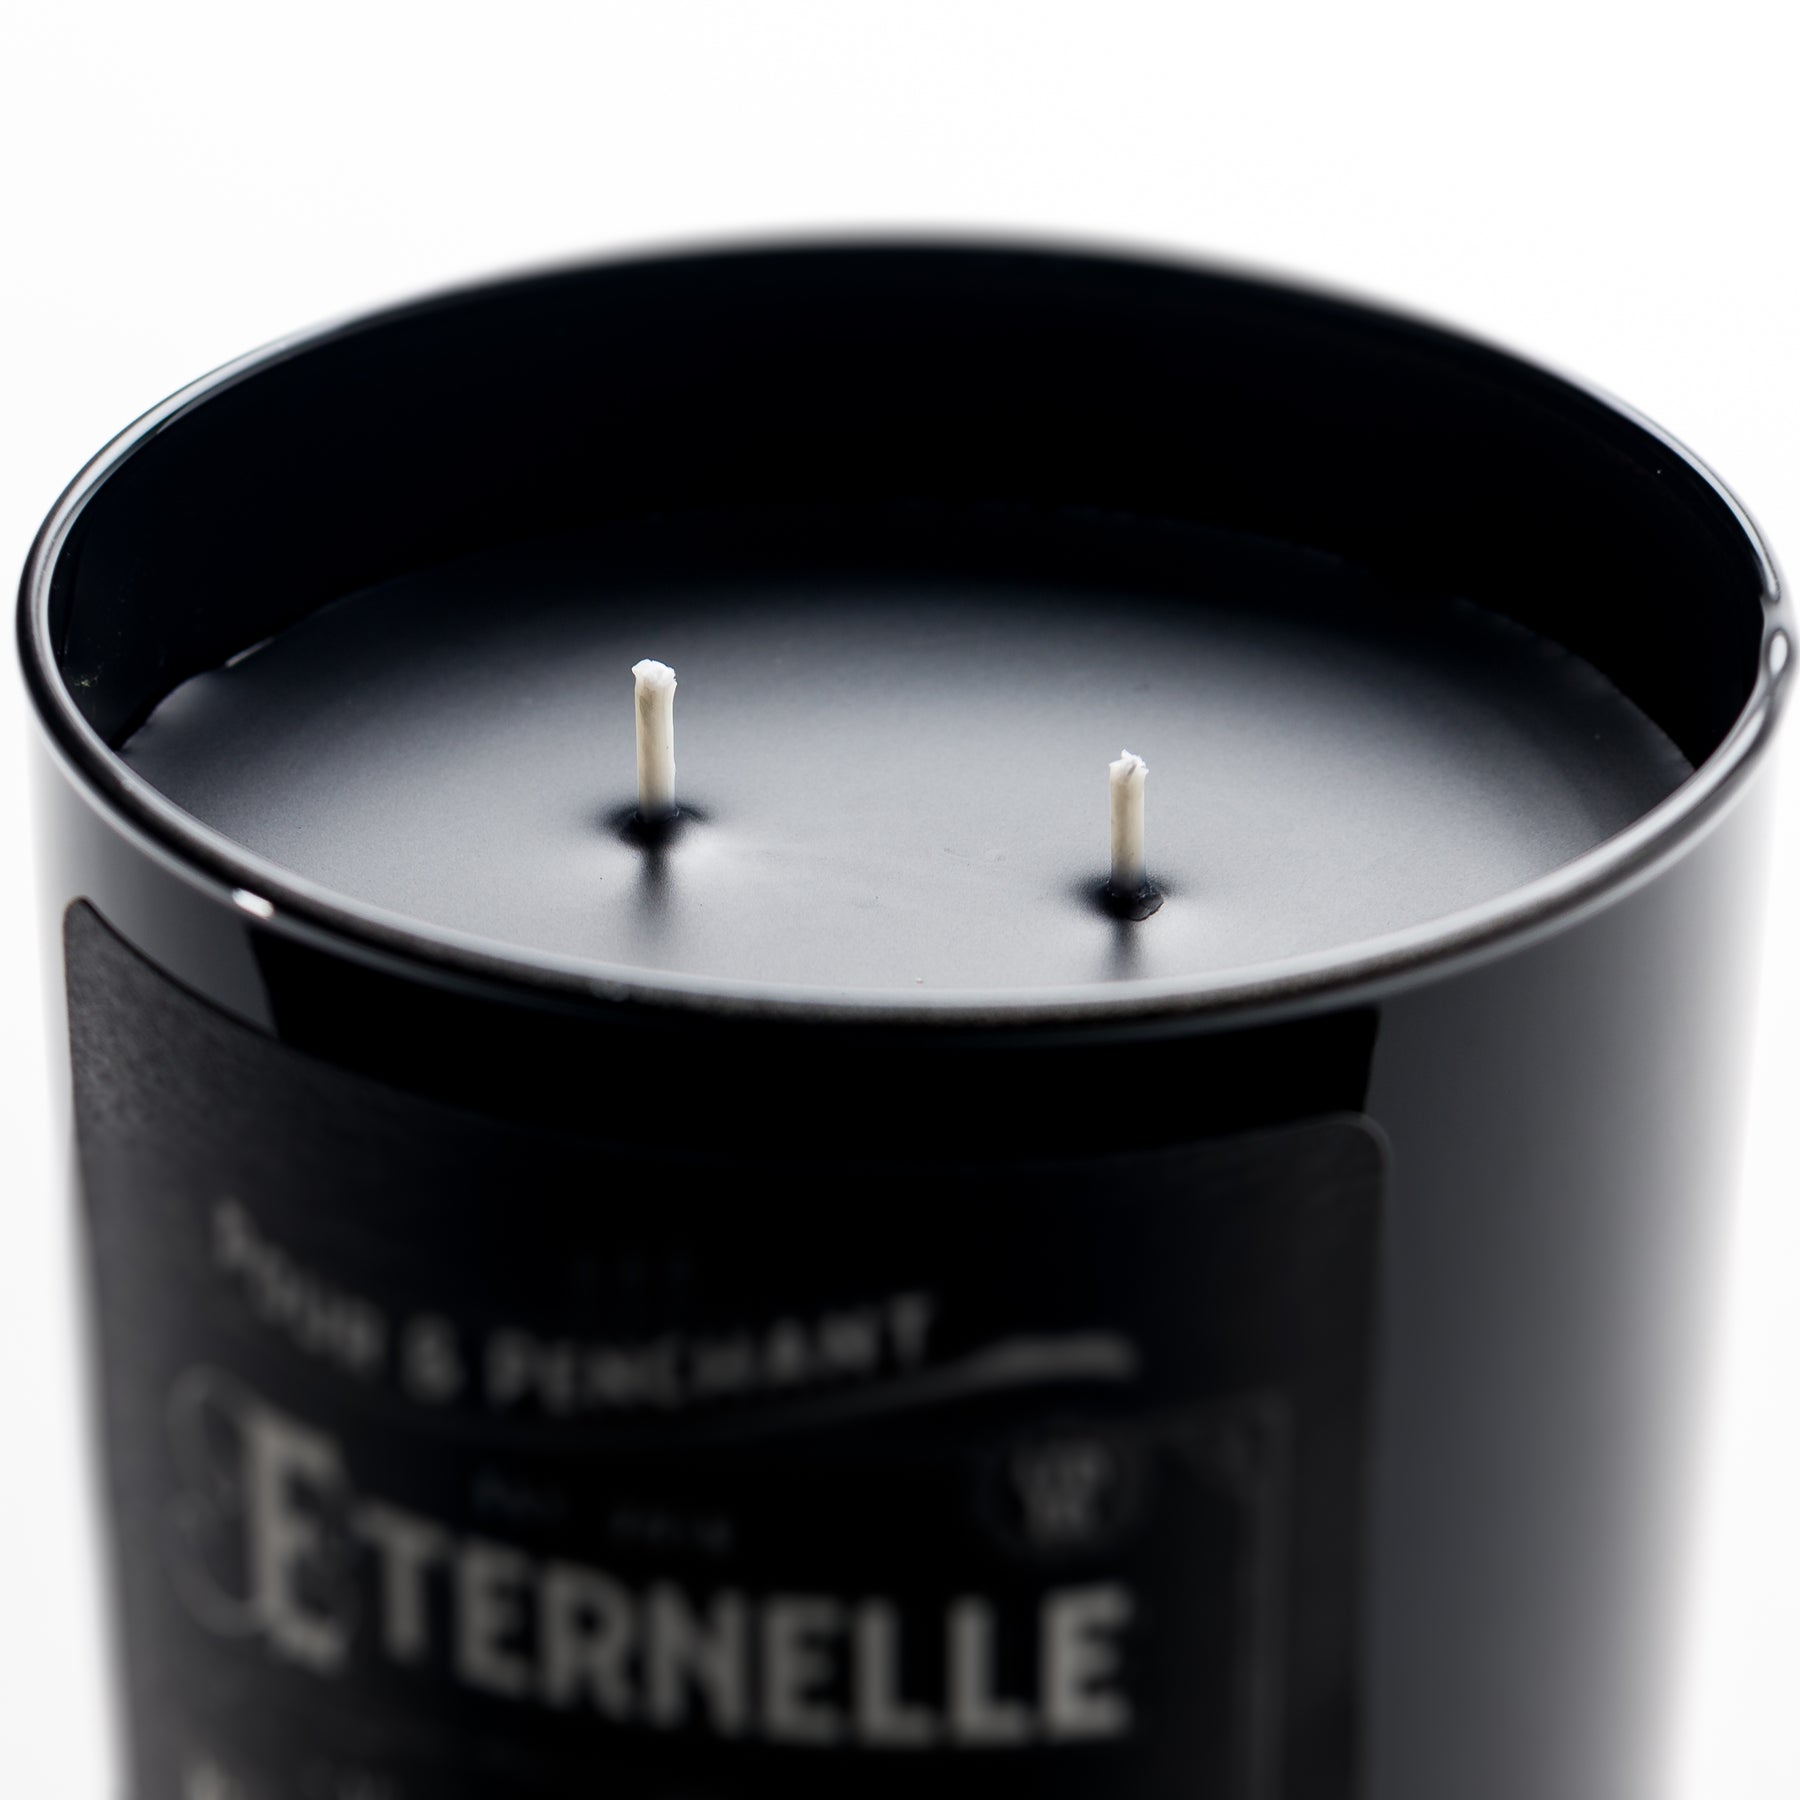 Close up image of a black candle vessel with two wicks and blurred background